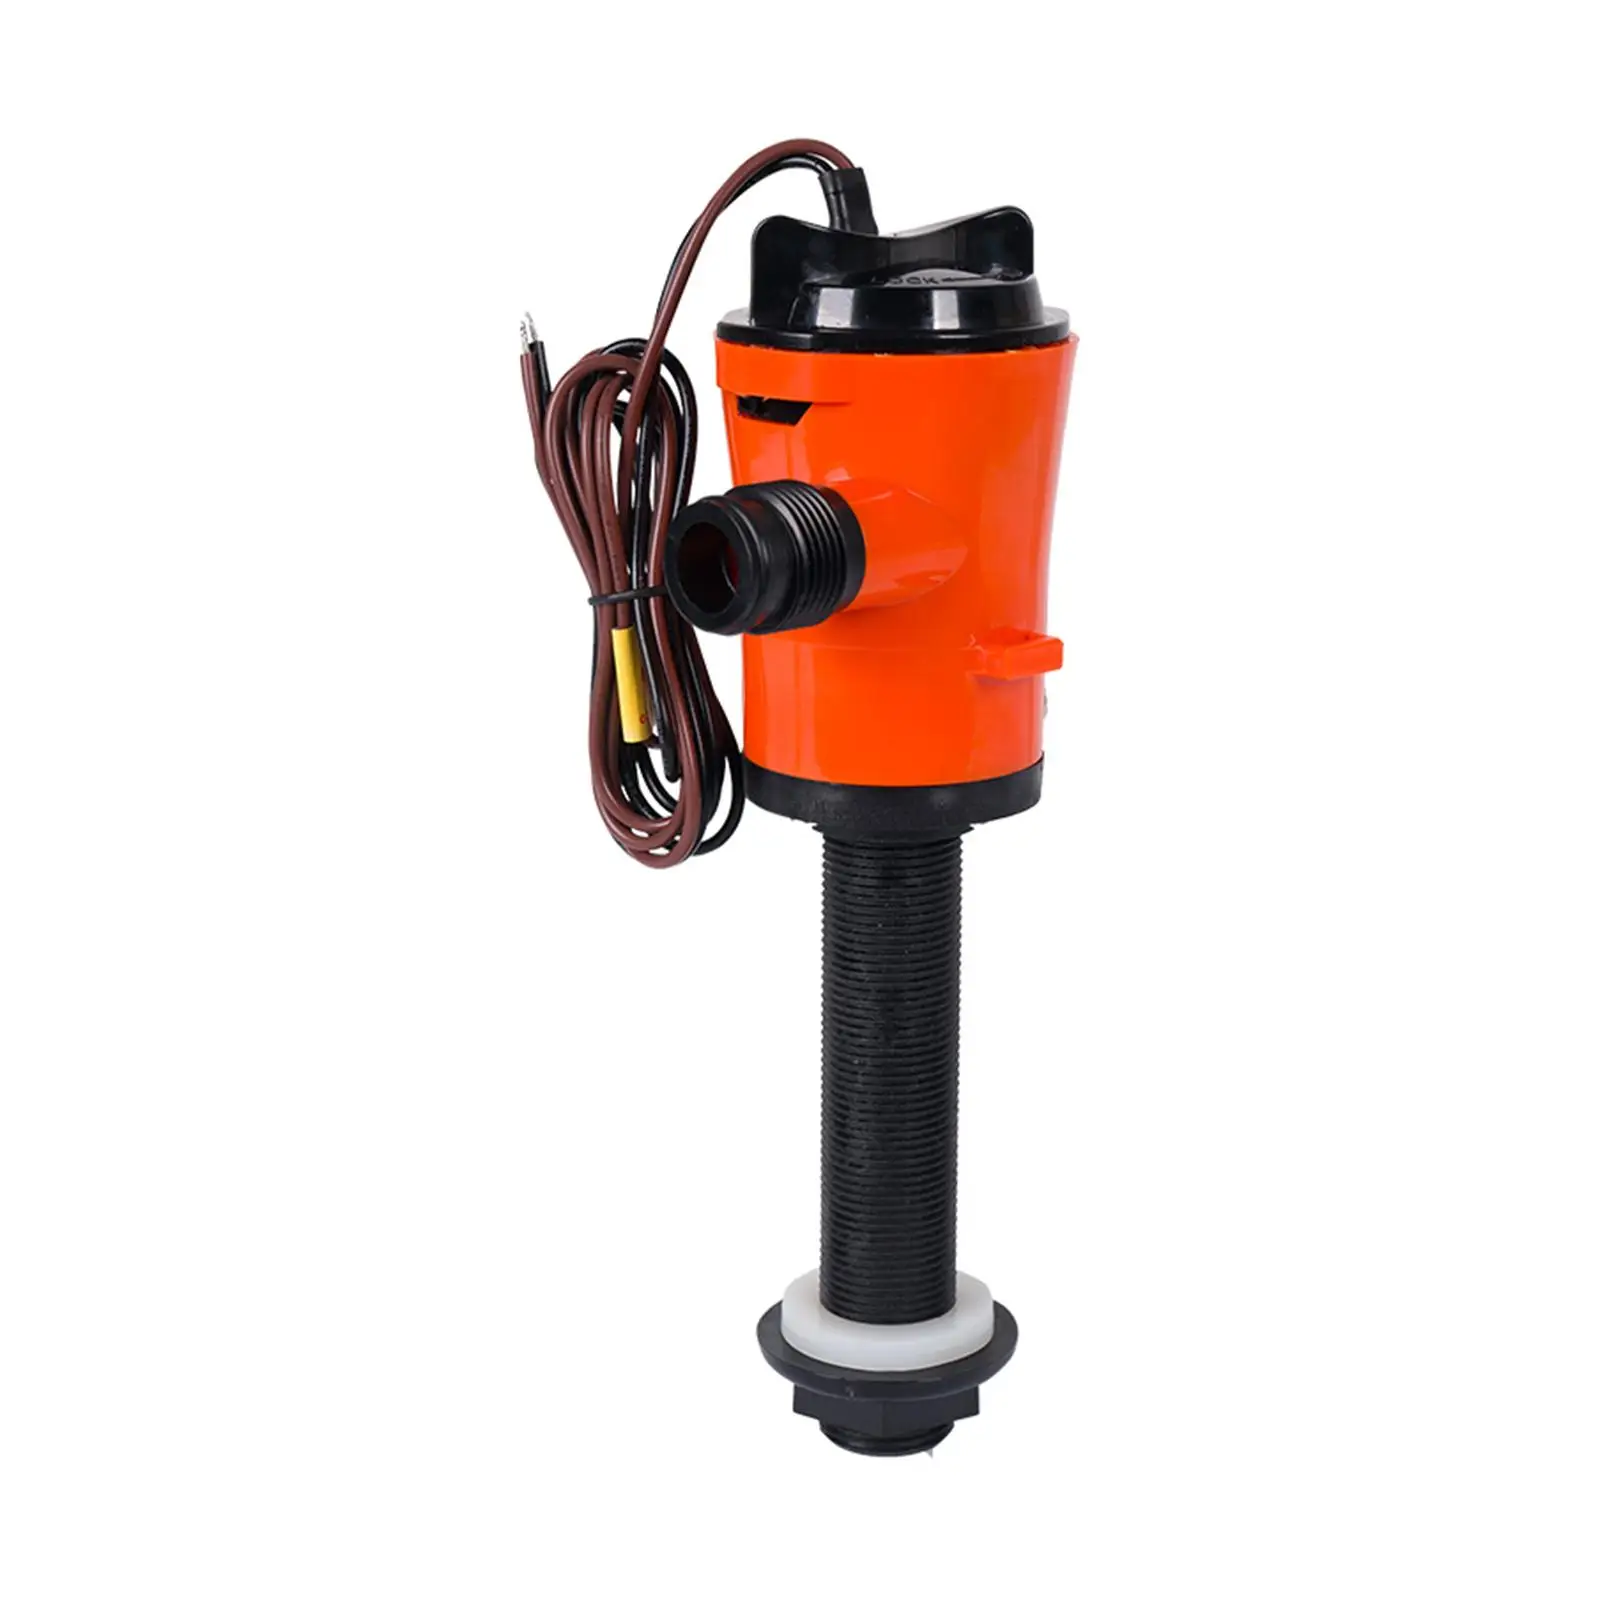 Aerator Livewell Pump Easy to Install Replacement Durable Boat Tools Professional with Filter Boat Aerator Pump 24V 800GPH